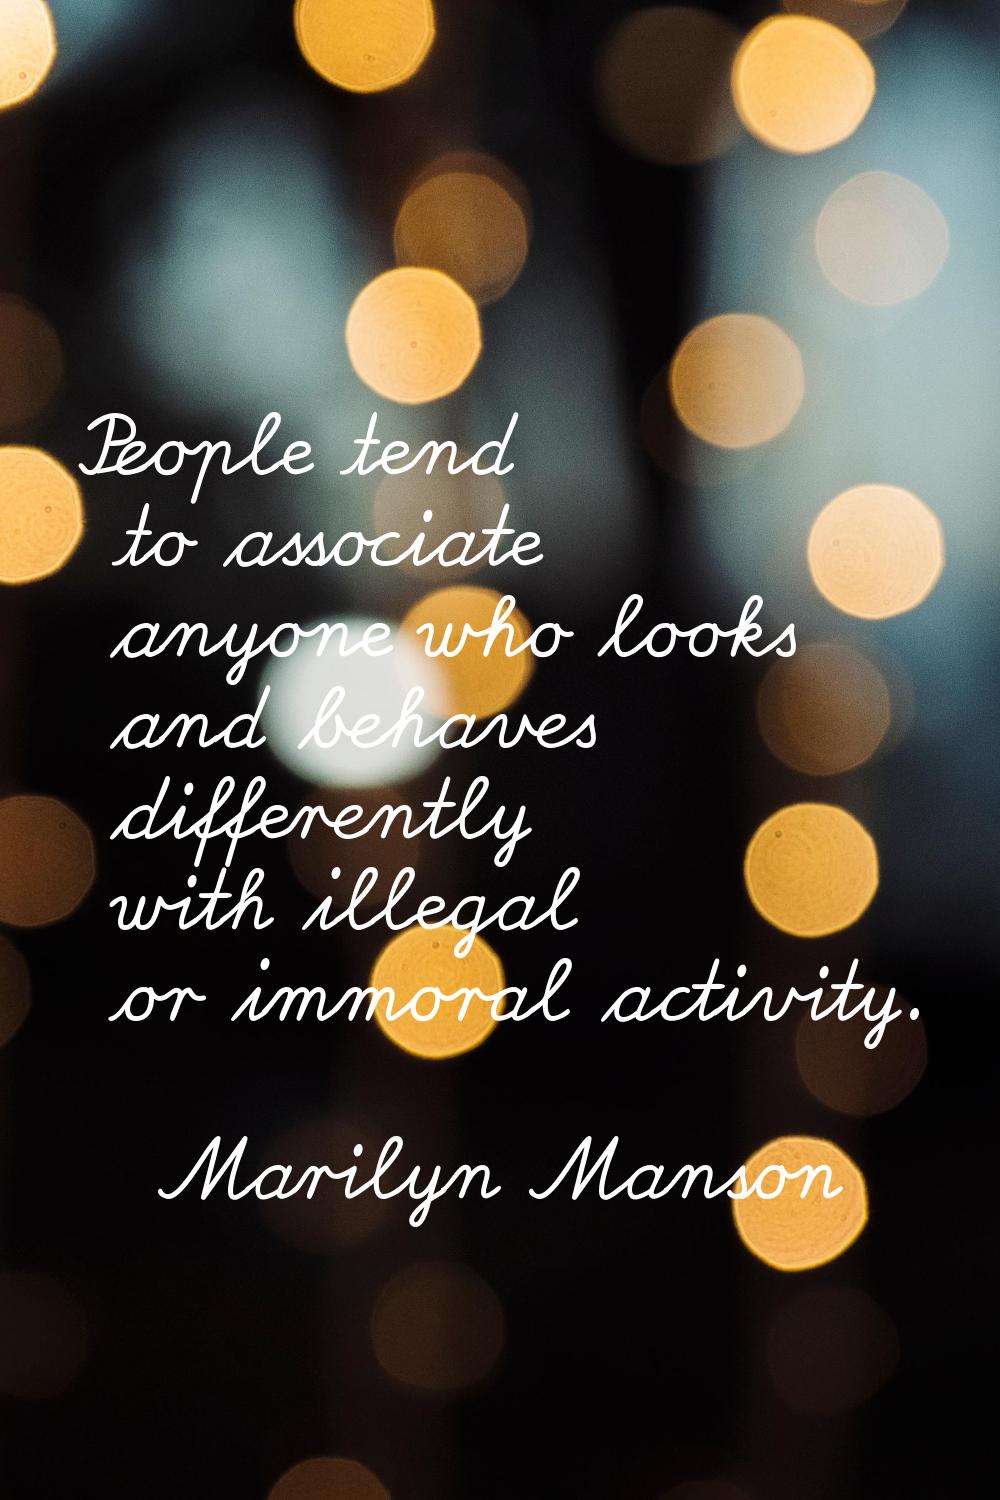 People tend to associate anyone who looks and behaves differently with illegal or immoral activity.